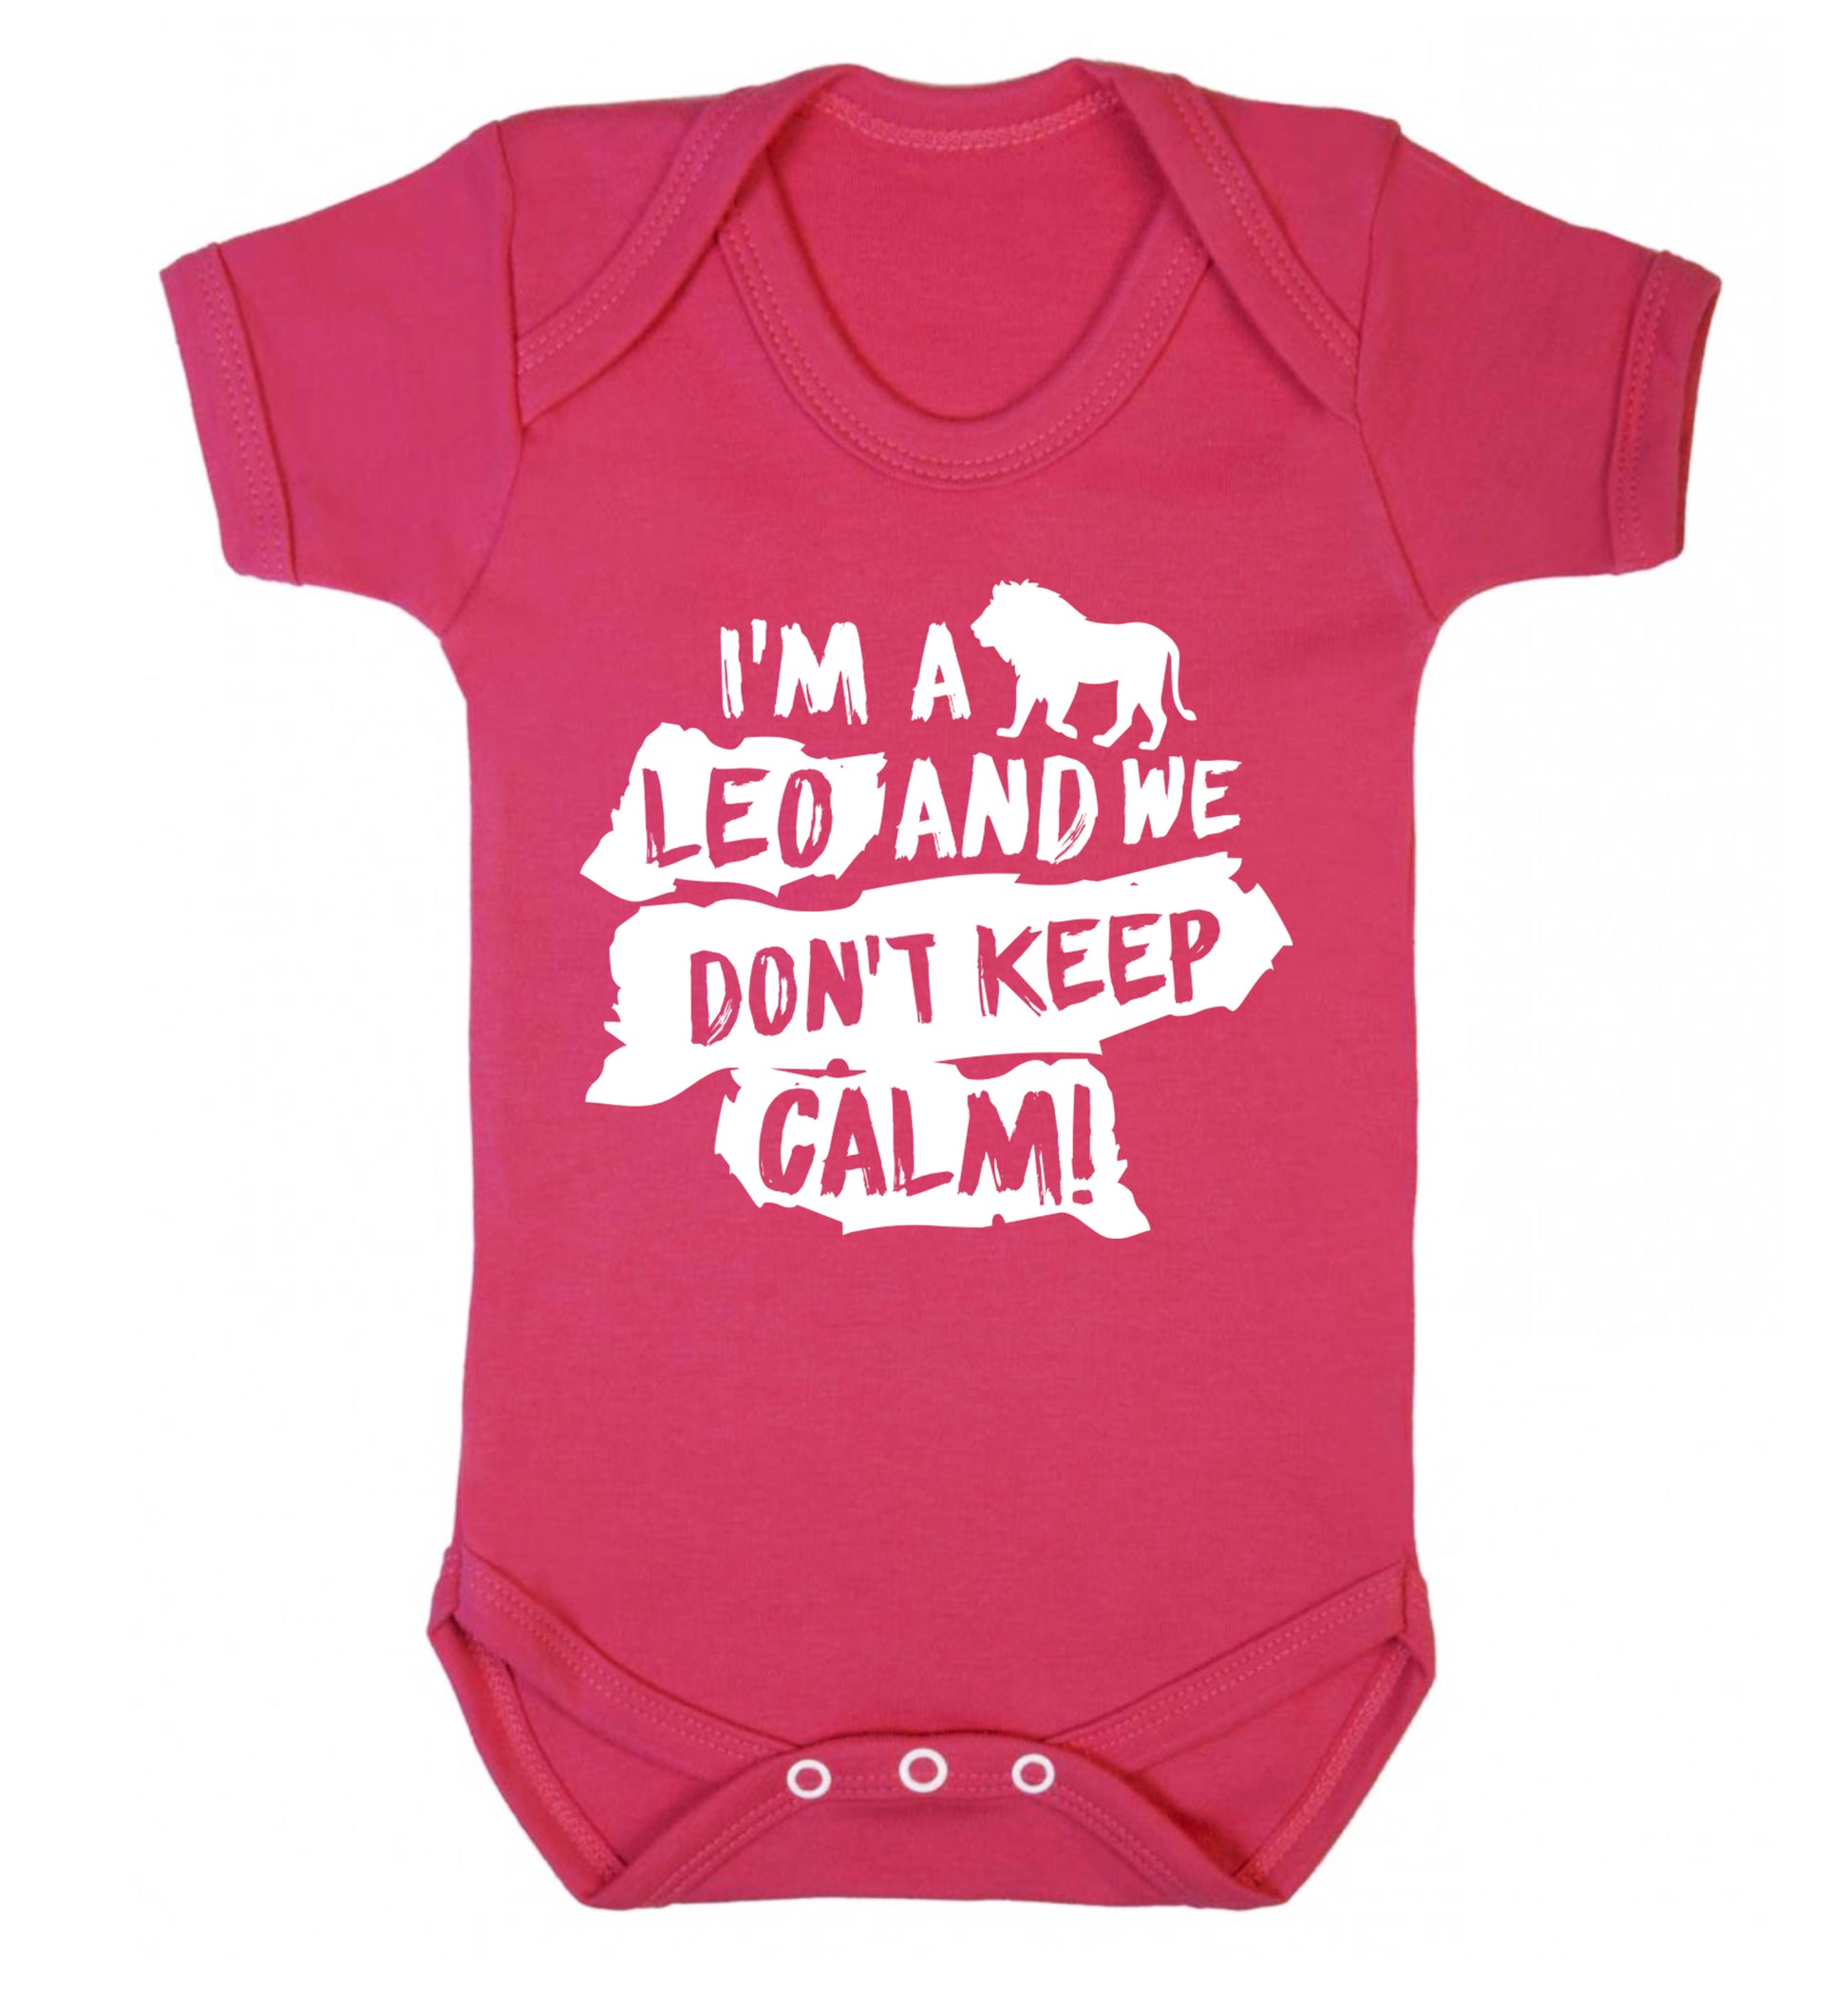 I'm a leo and we don't keep calm! Baby Vest dark pink 18-24 months